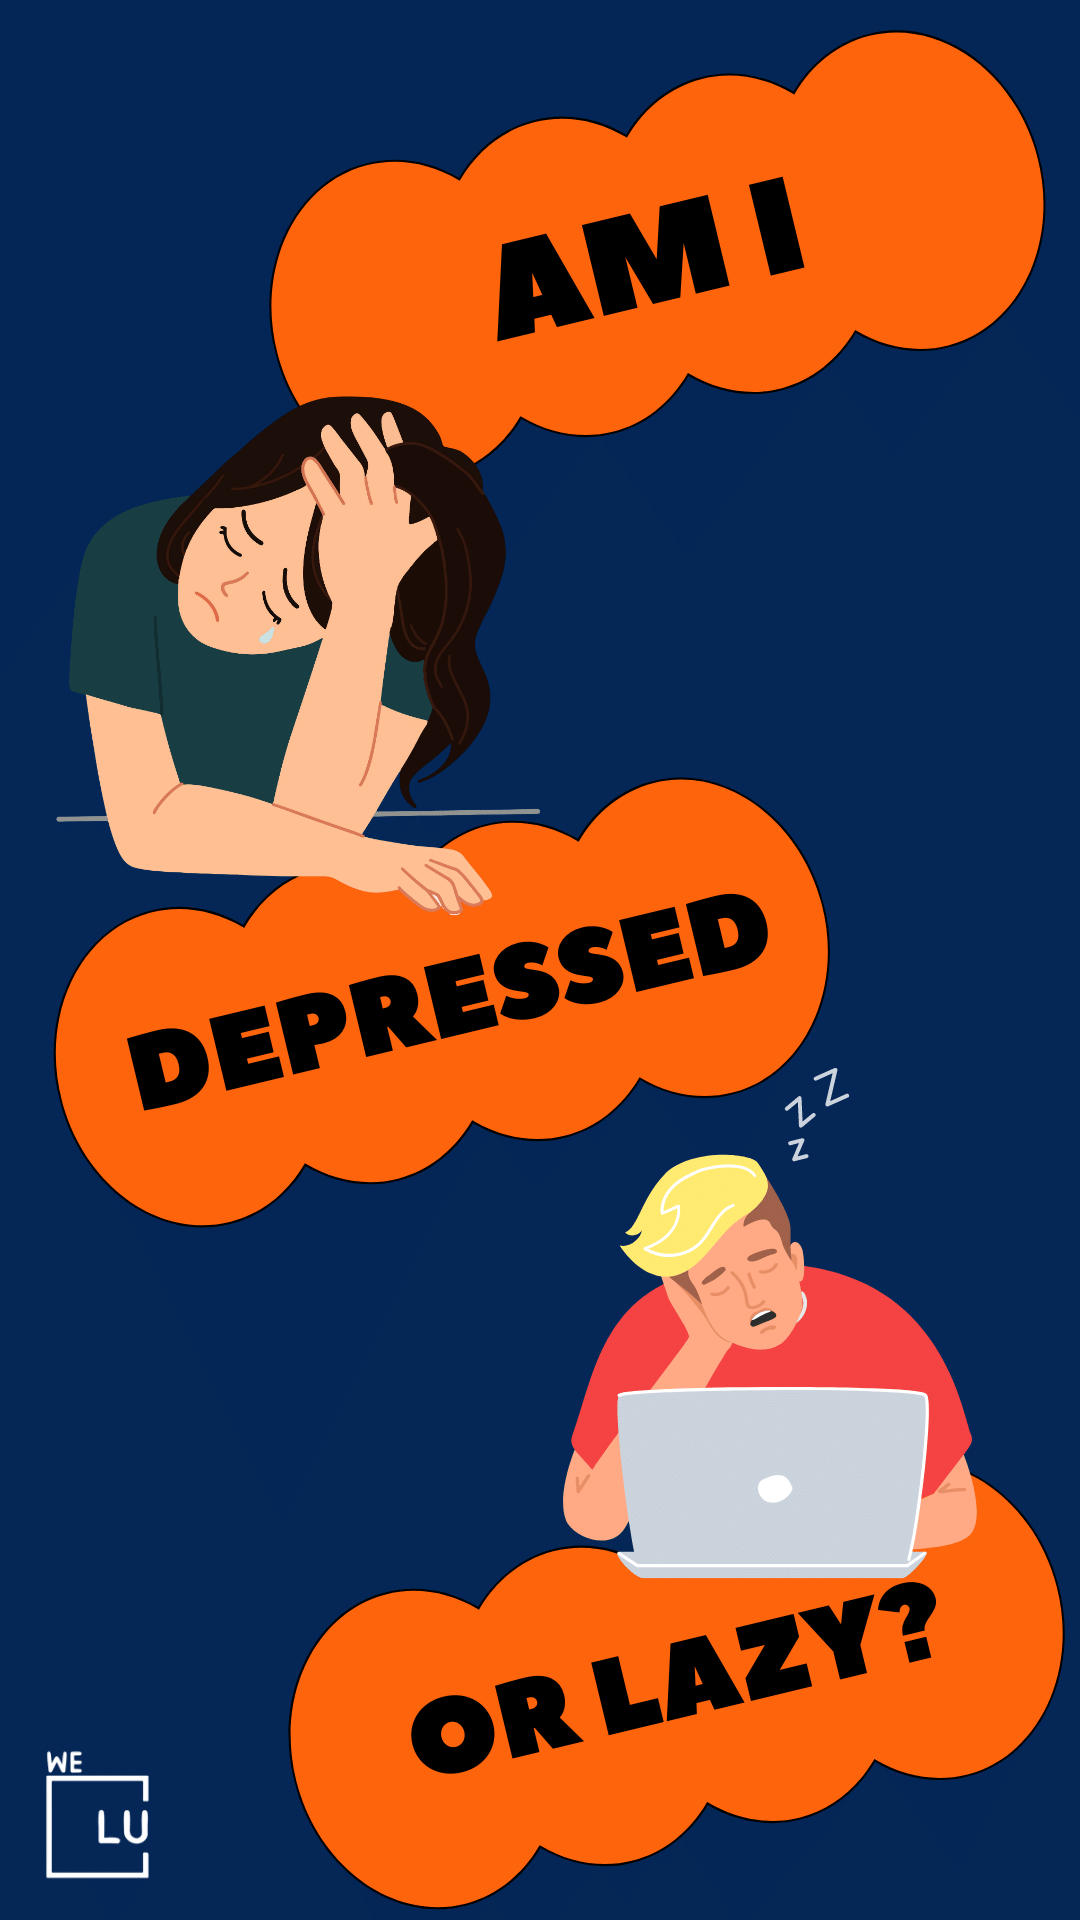 Clinical depression can have a significant impact on work productivity and functioning. It is a leading cause of disability and absenteeism in the workplace, resulting in economic costs for individuals, employers, and society.